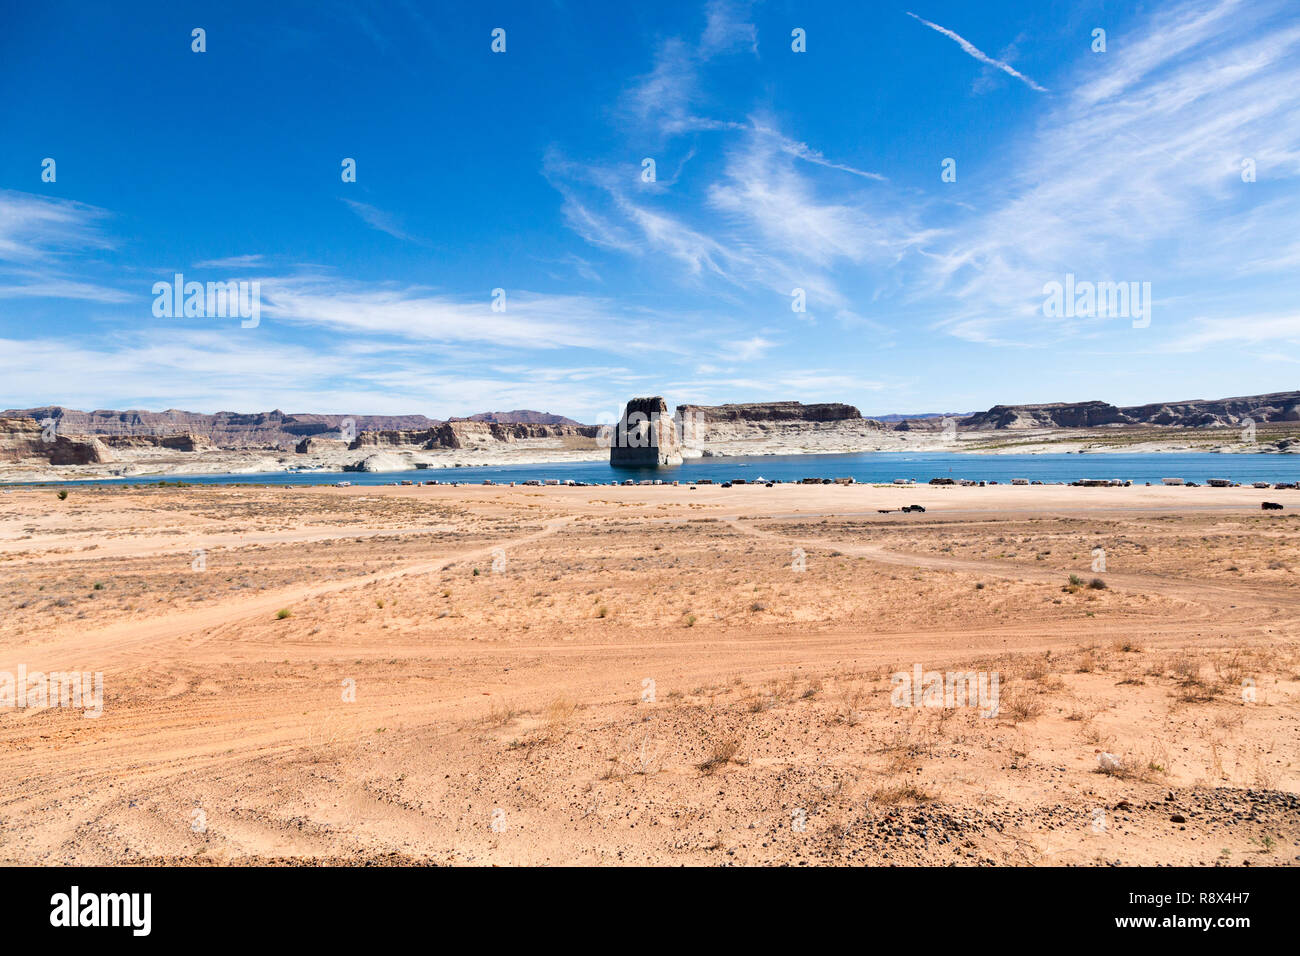 Lake Powell is a reservoir on the Colorado River, straddling the border between Utah and Arizona, United States. Most of Lake Powell is located in Uta Stock Photo